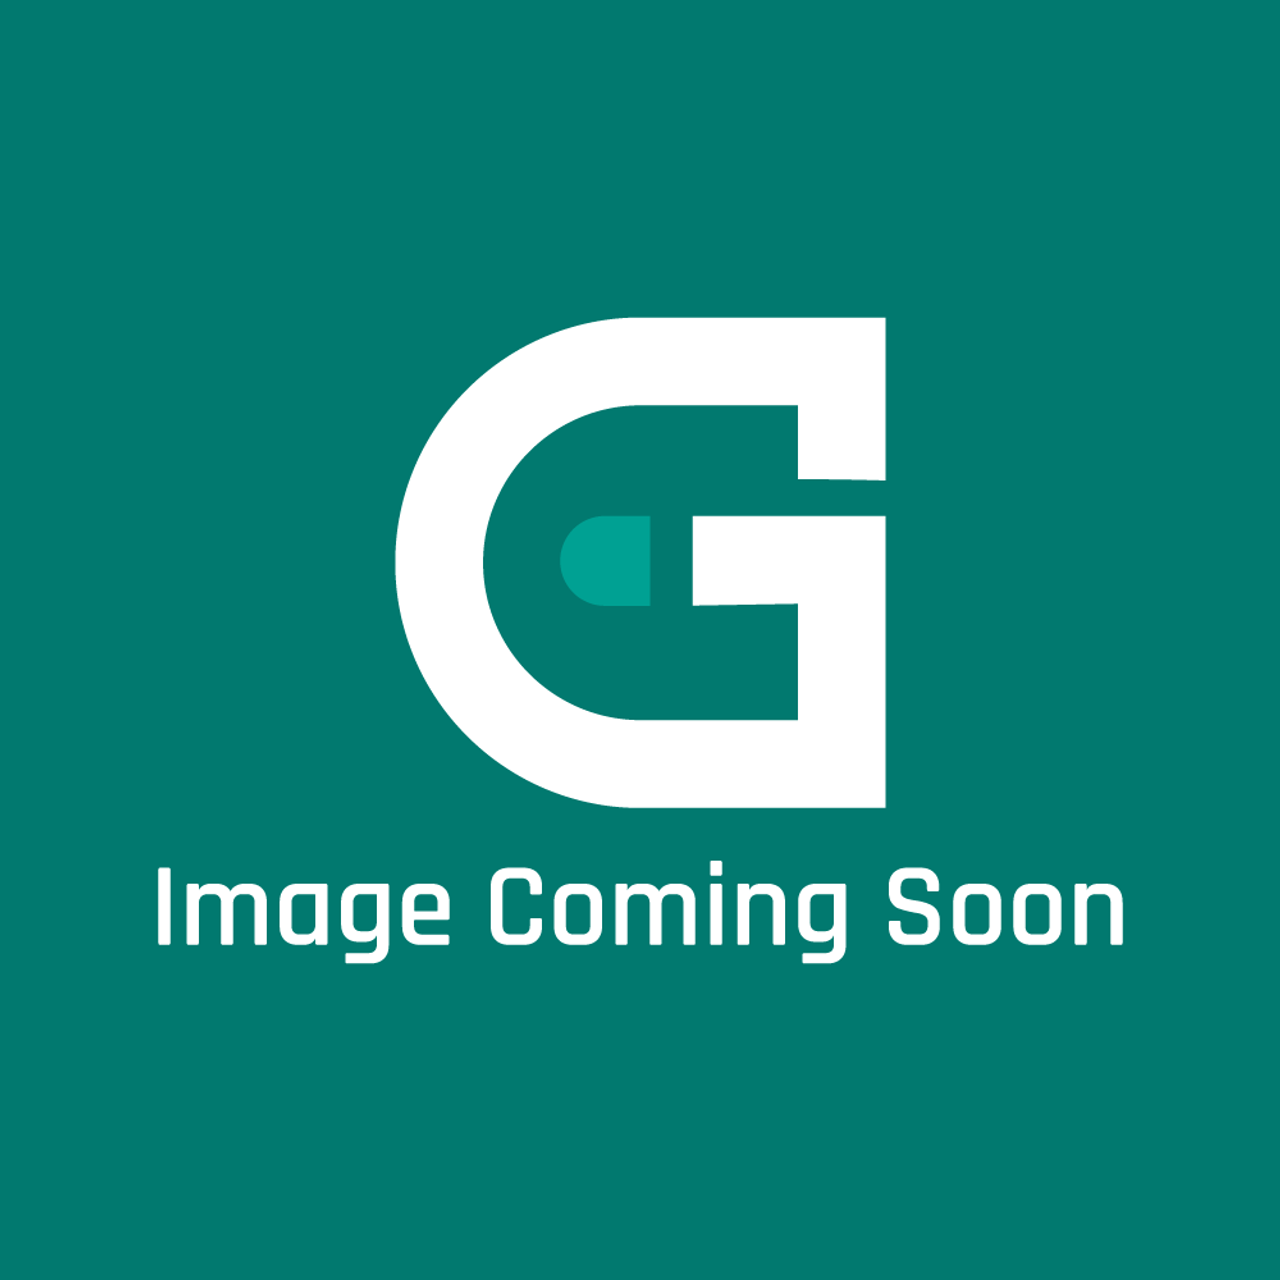 AGA Marvel S7798 - Oven Wrap Insulation Cii Gas - Image Coming Soon!